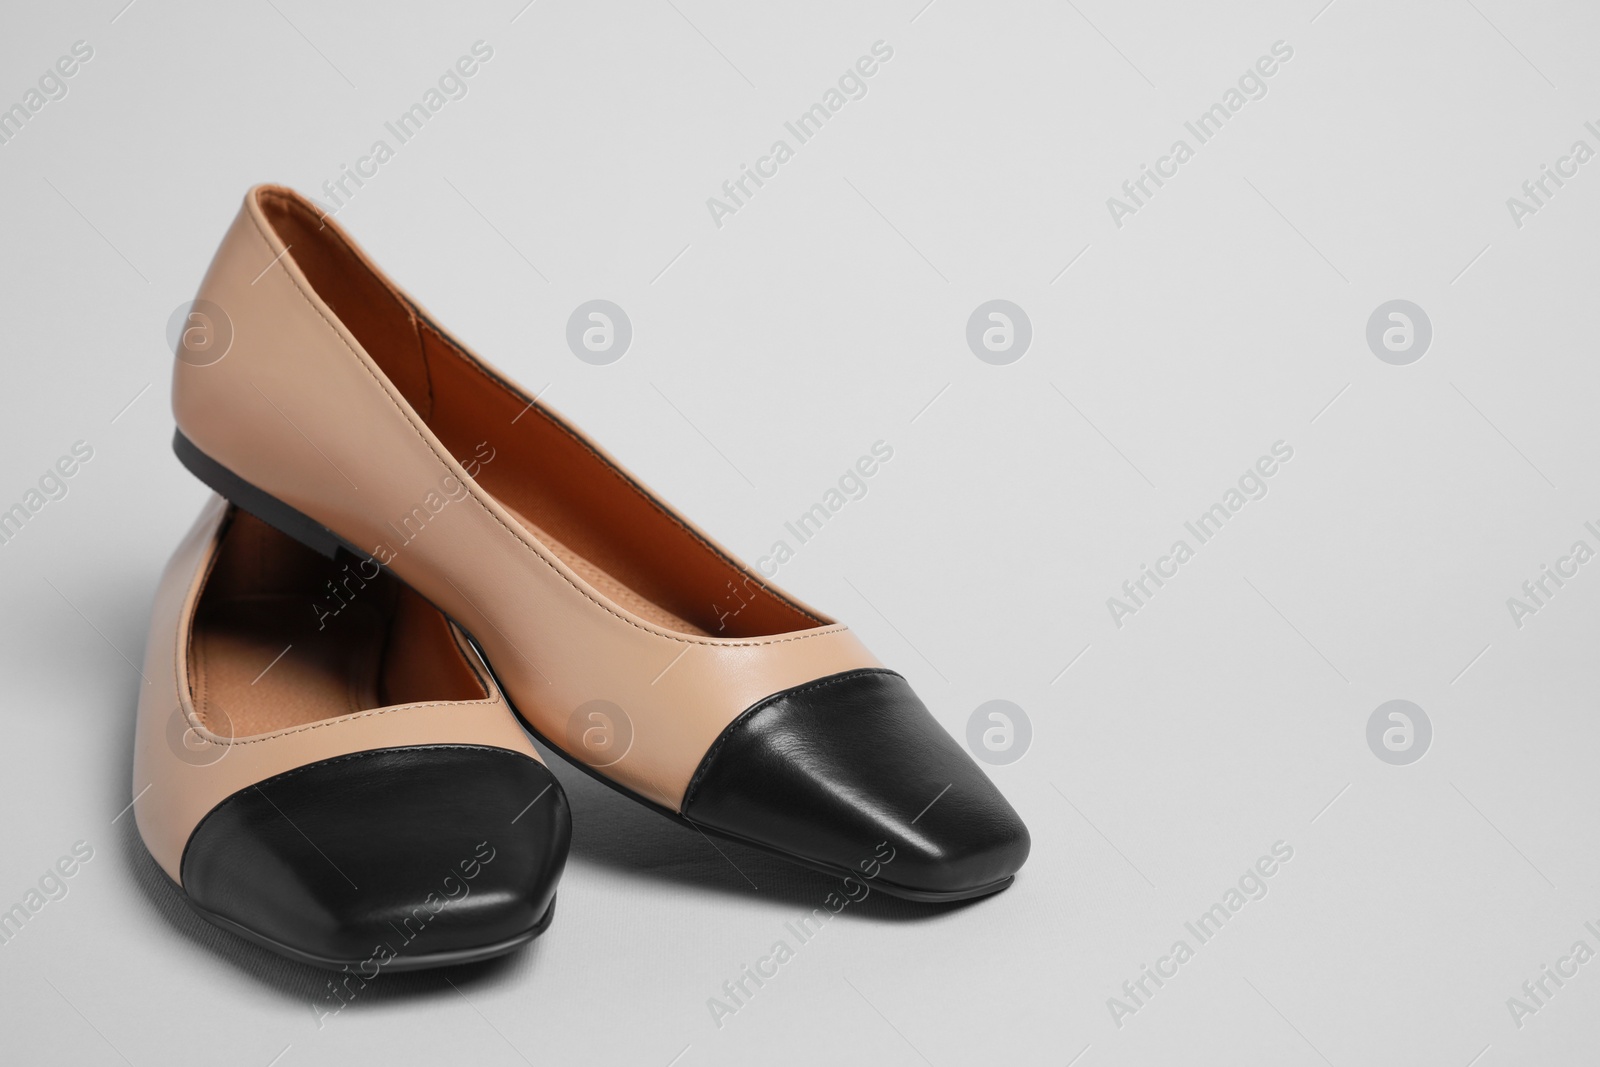 Photo of Pair of new stylish square toe ballet flats on light grey background. Space for text